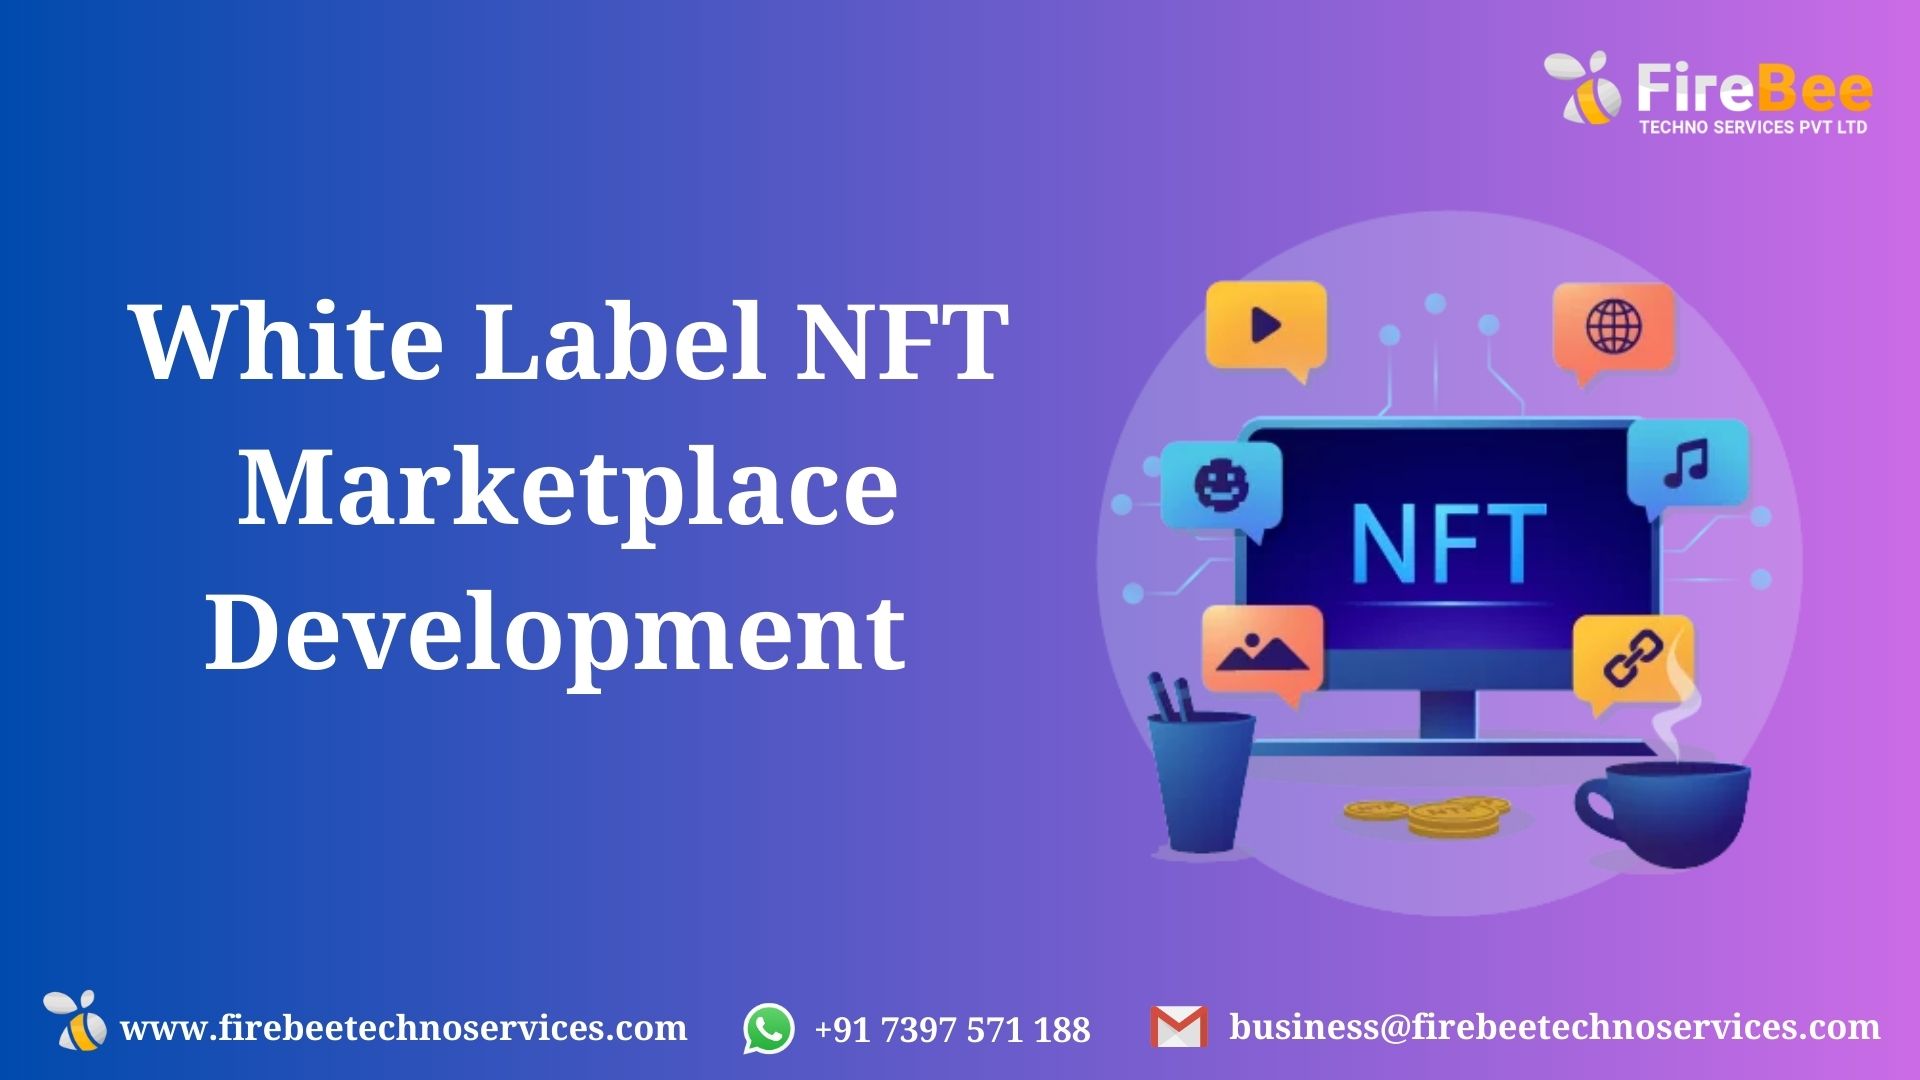  Build Your Brand With White Label NFT Marketplace